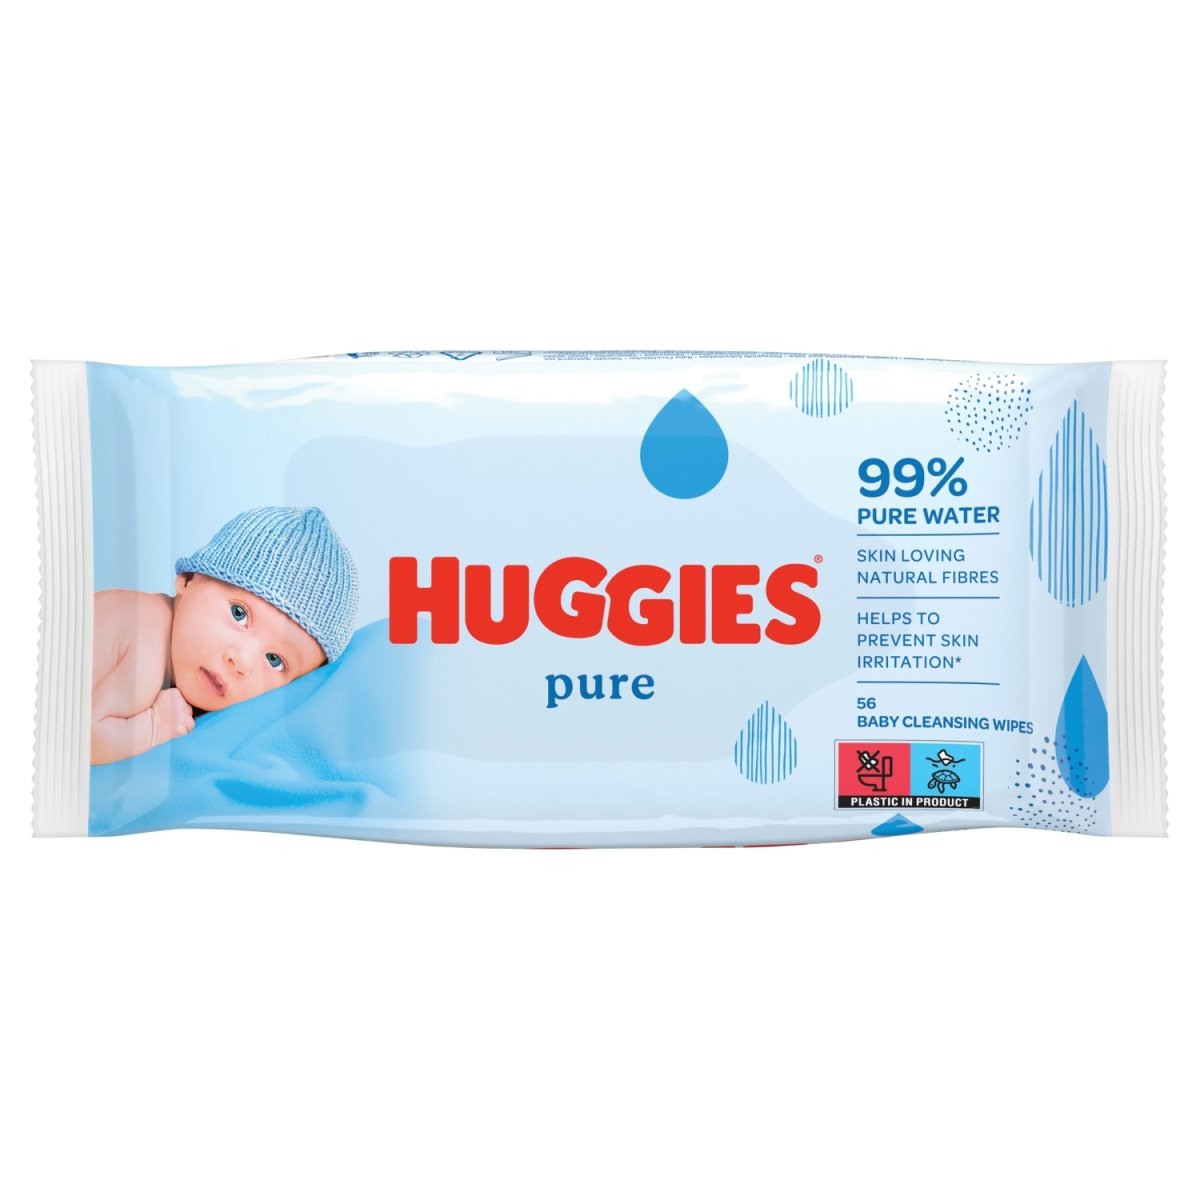 Huggies Baby Wipes New Pure - Intamarque 5029053550039